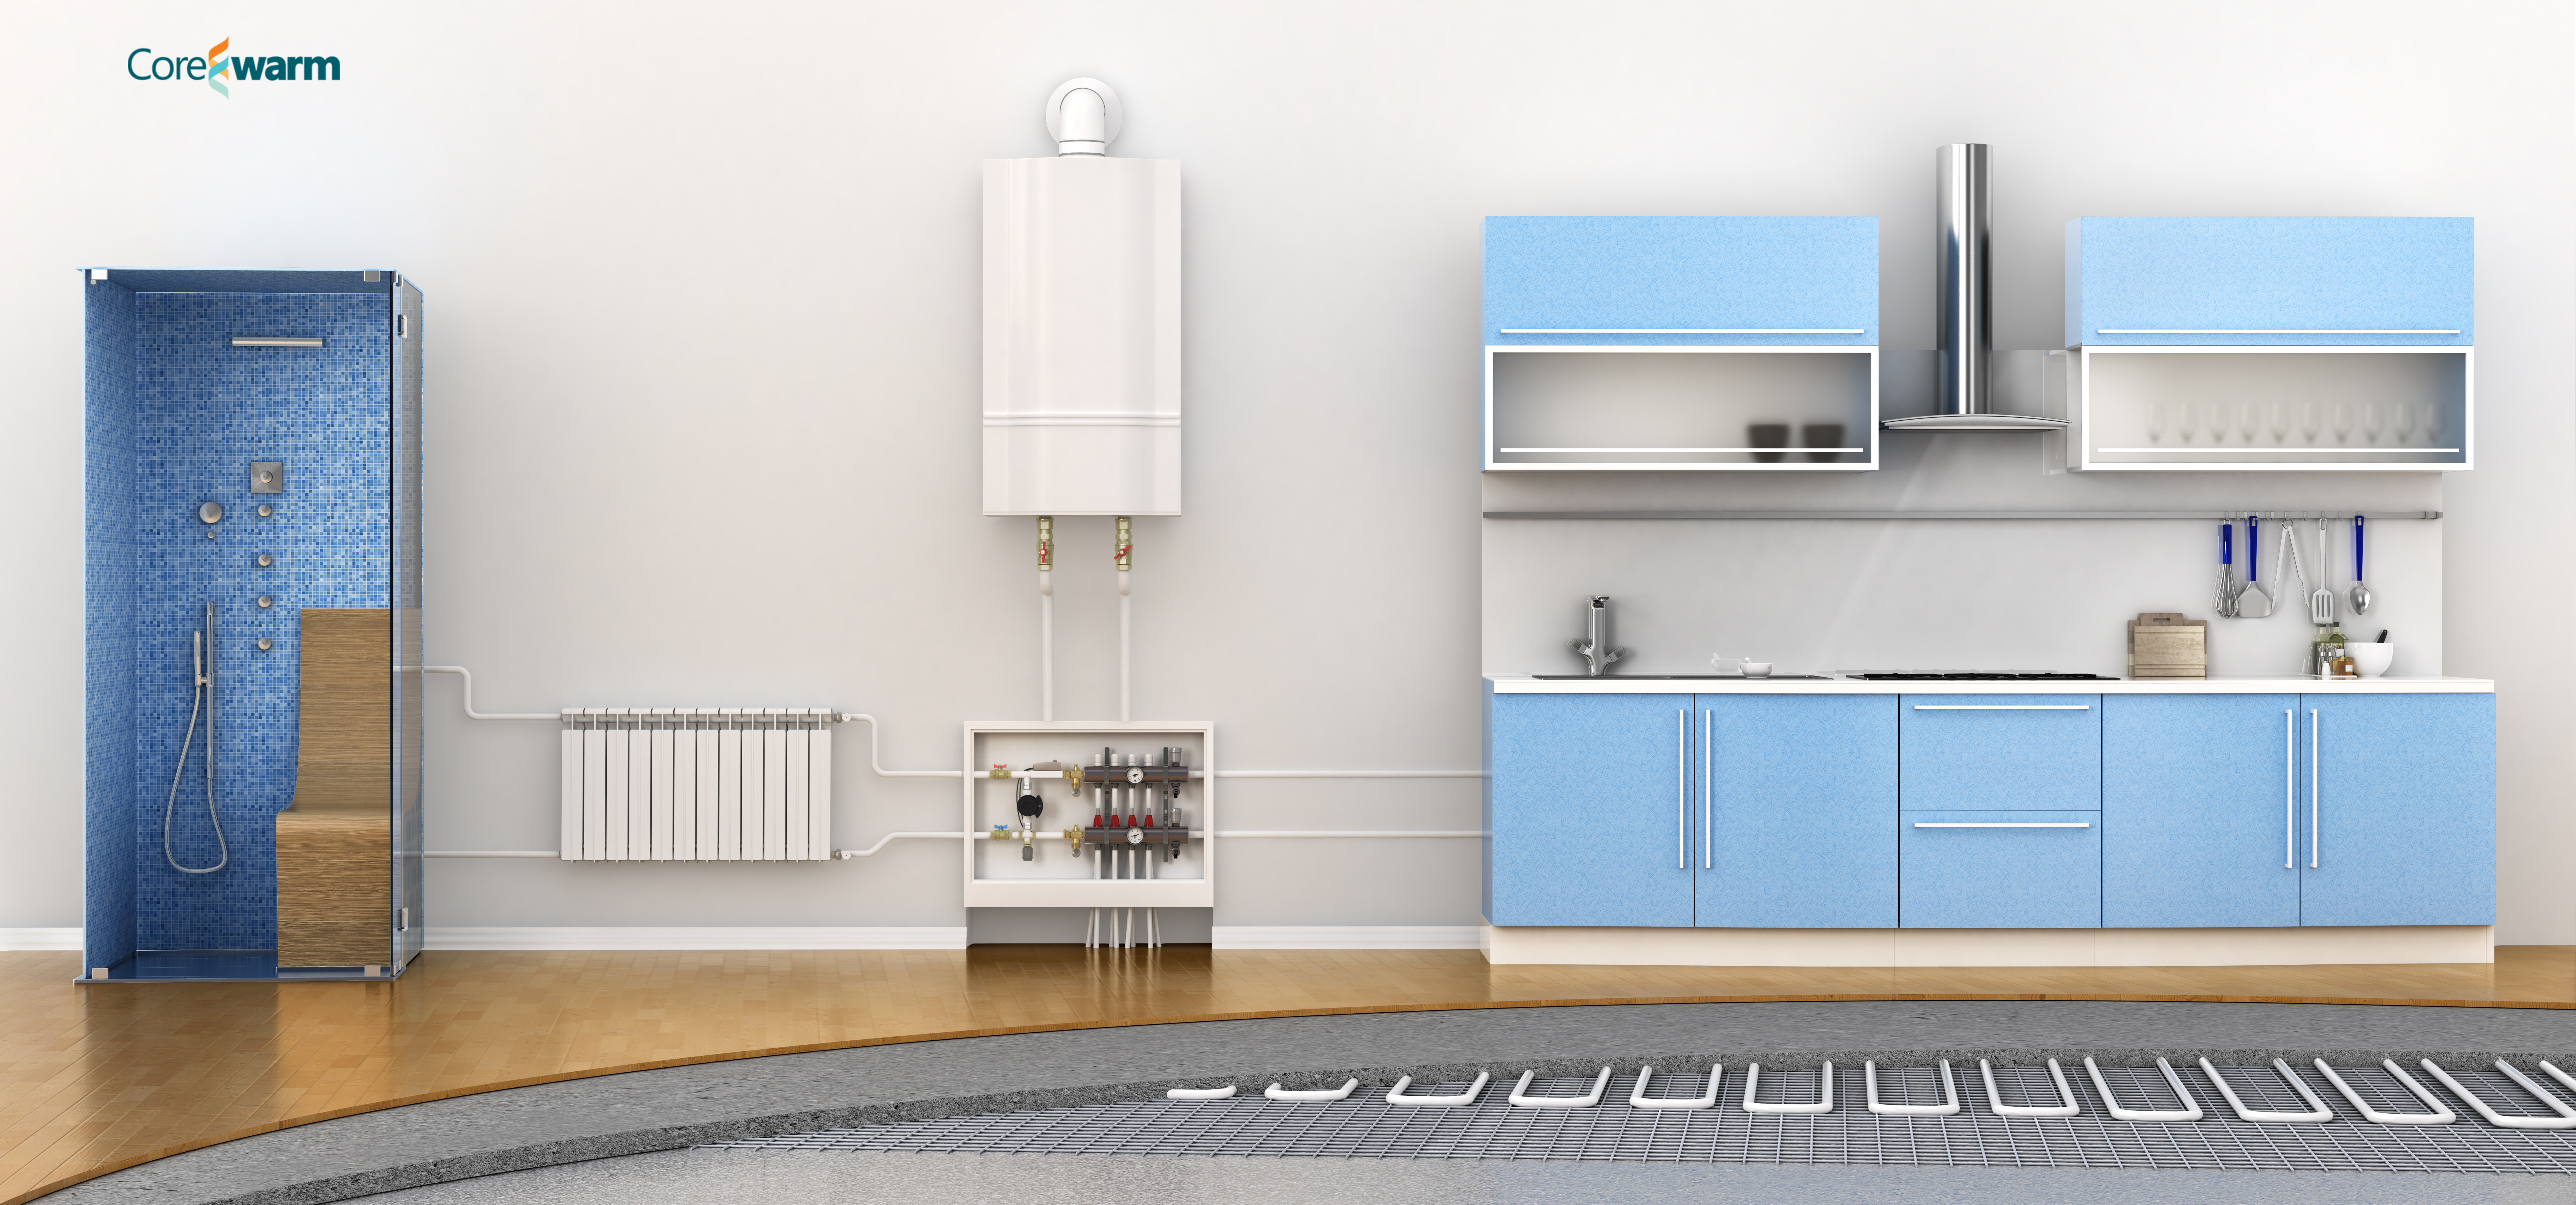 Why is underfloor heating for kitchens & bathrooms preferable to homeowners?